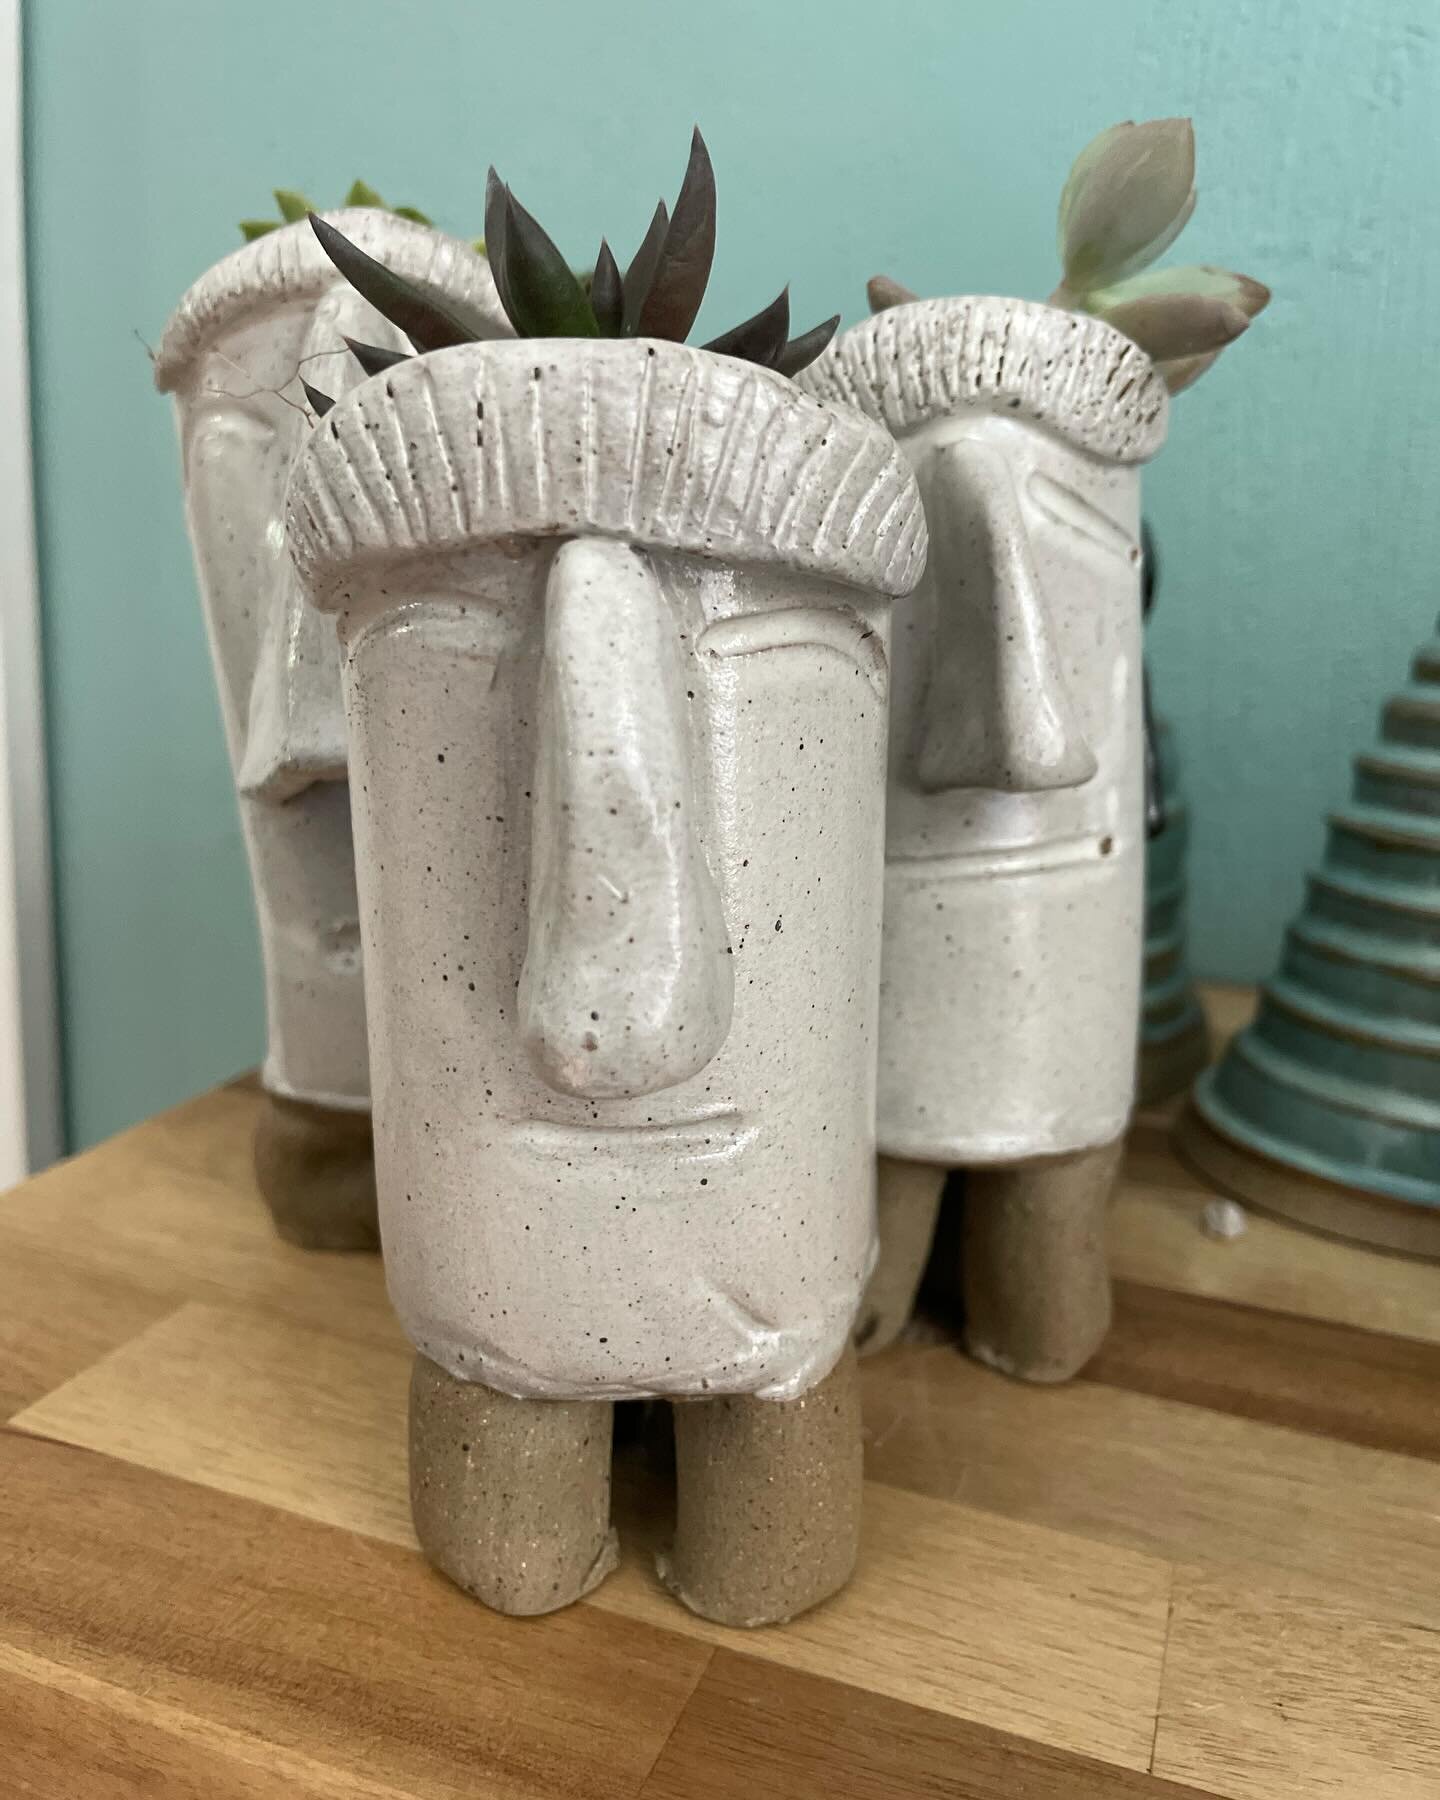 Monday night!!! Come create with me and @23.beans @thegaragevb!!! We will be making pot heads and face vases. Sign up at www.vbpotterystudio.com